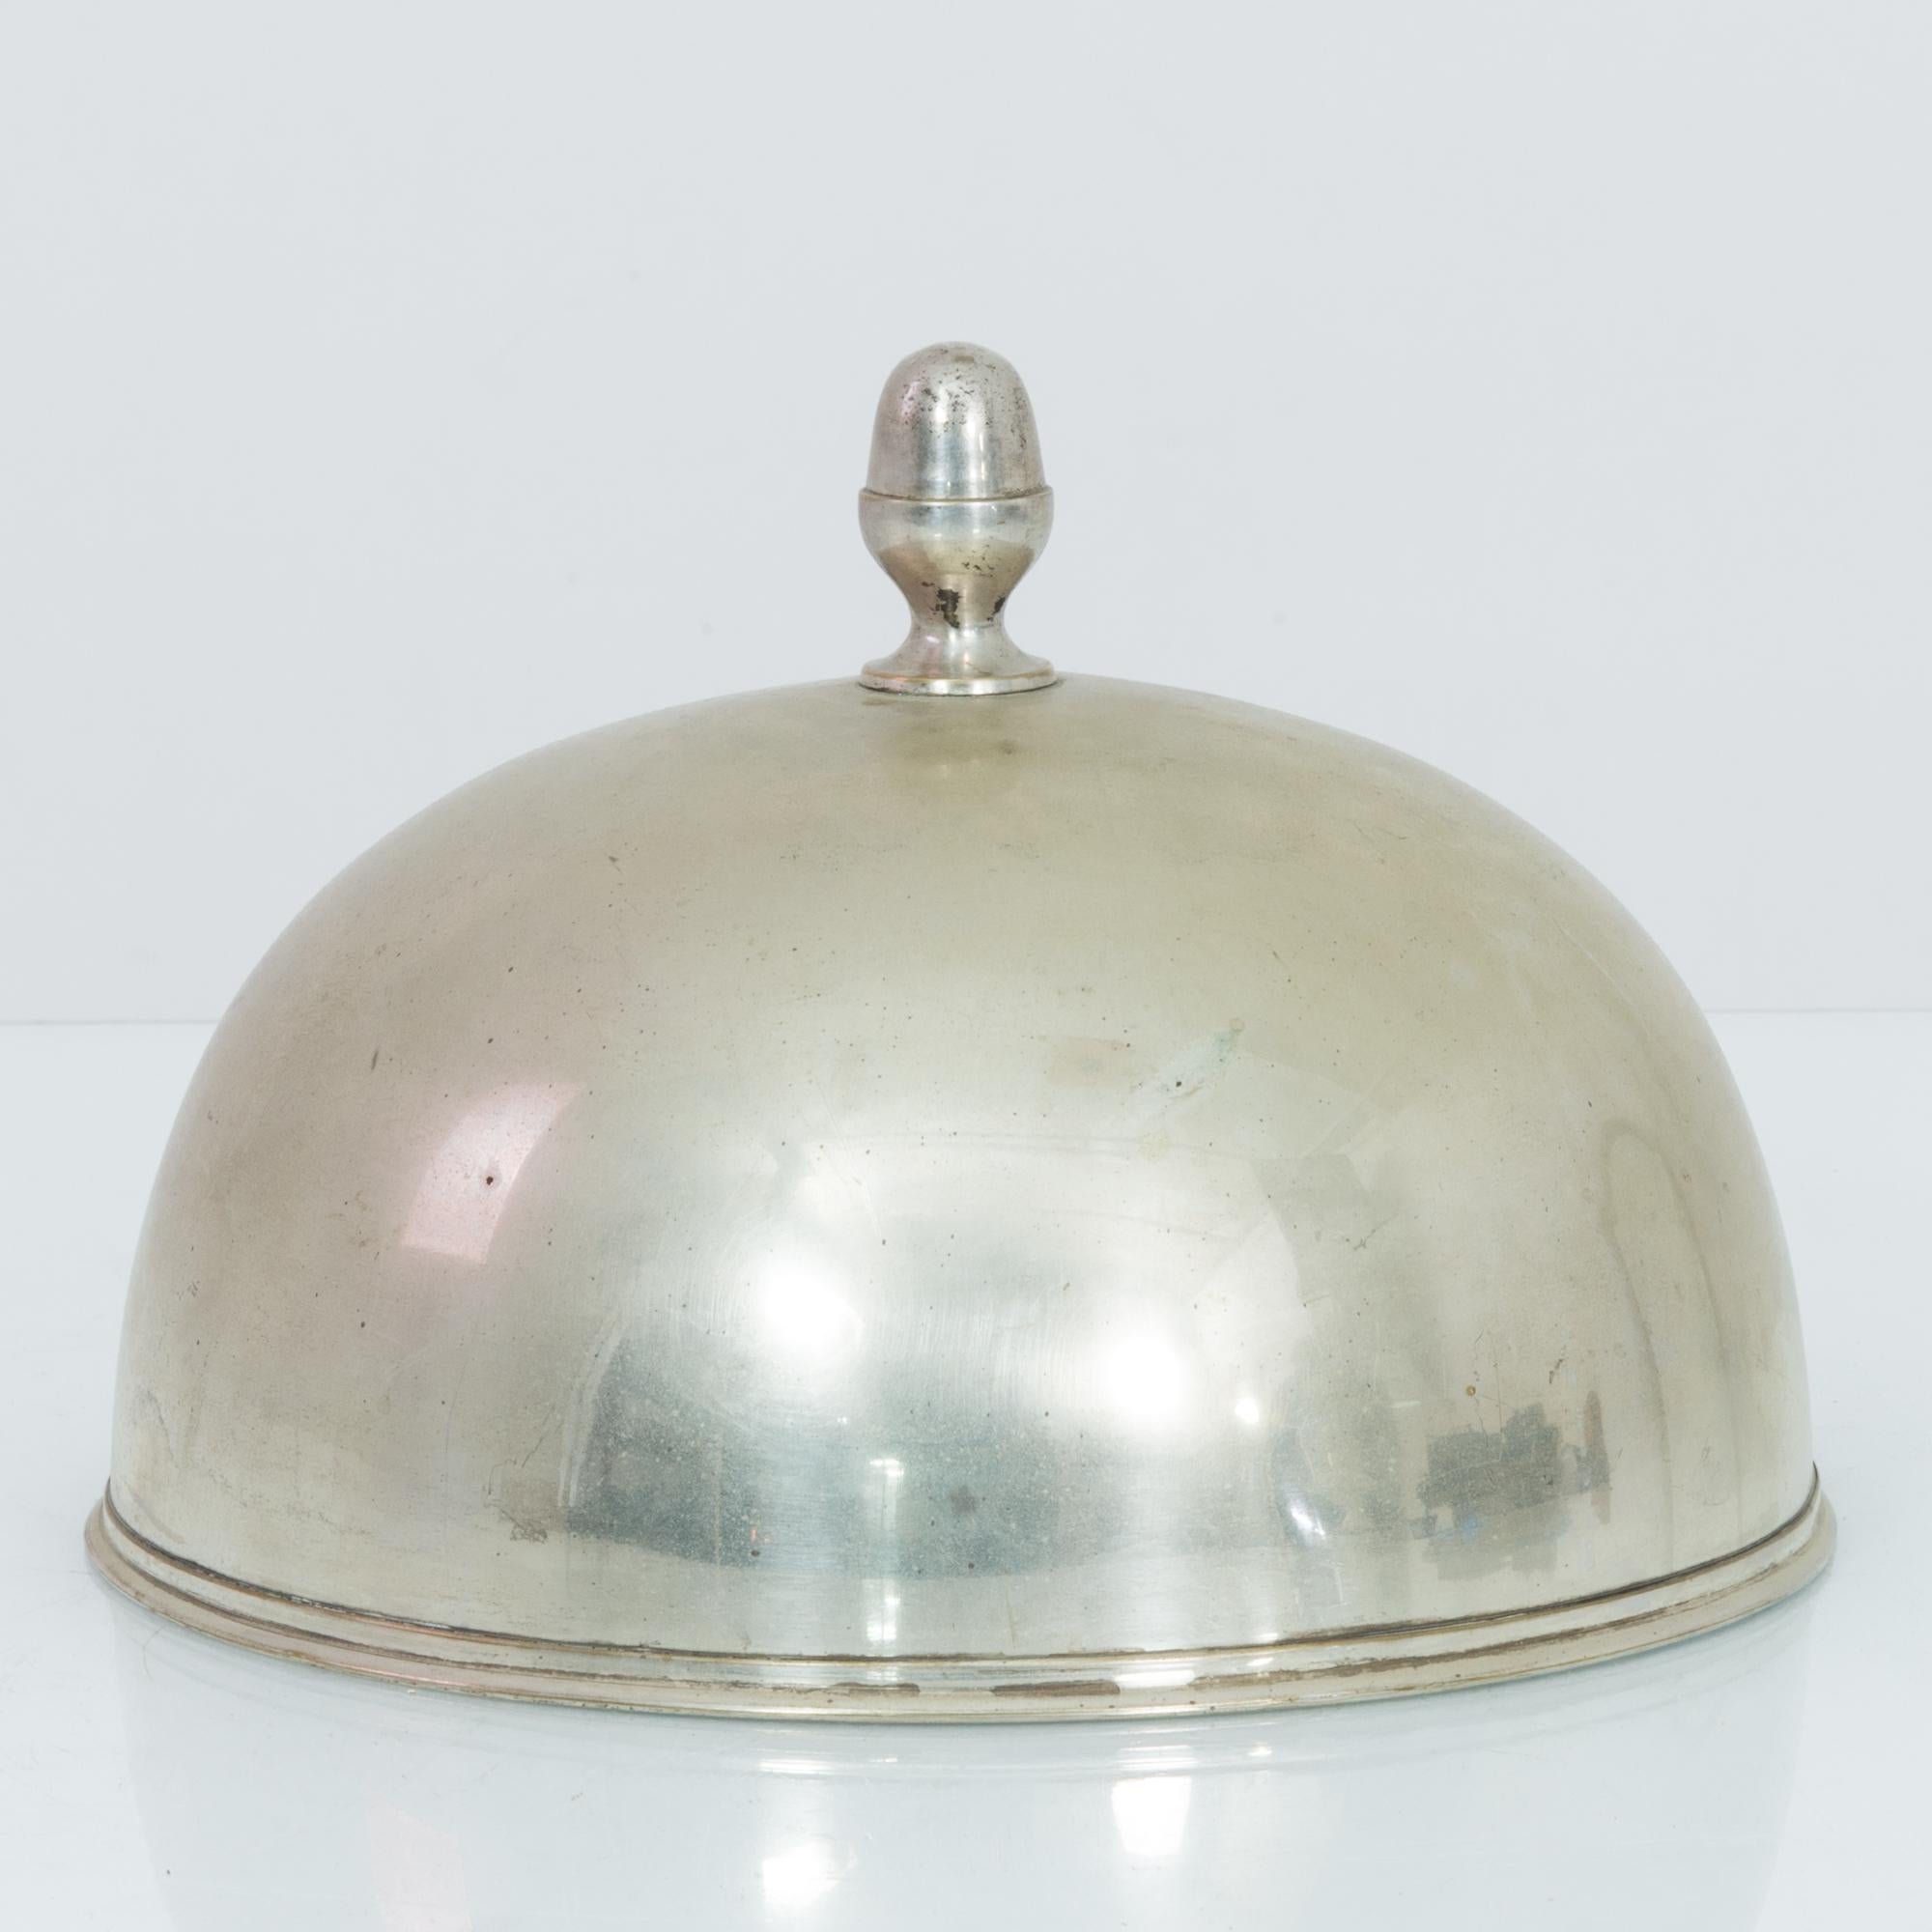 This silver-plated serving cloche was made in Europe in the 1940s. Gracefully decorated with a carved rim and a globe finial on the lid. Its timeworn patina imparts an elegance from yesteryear.